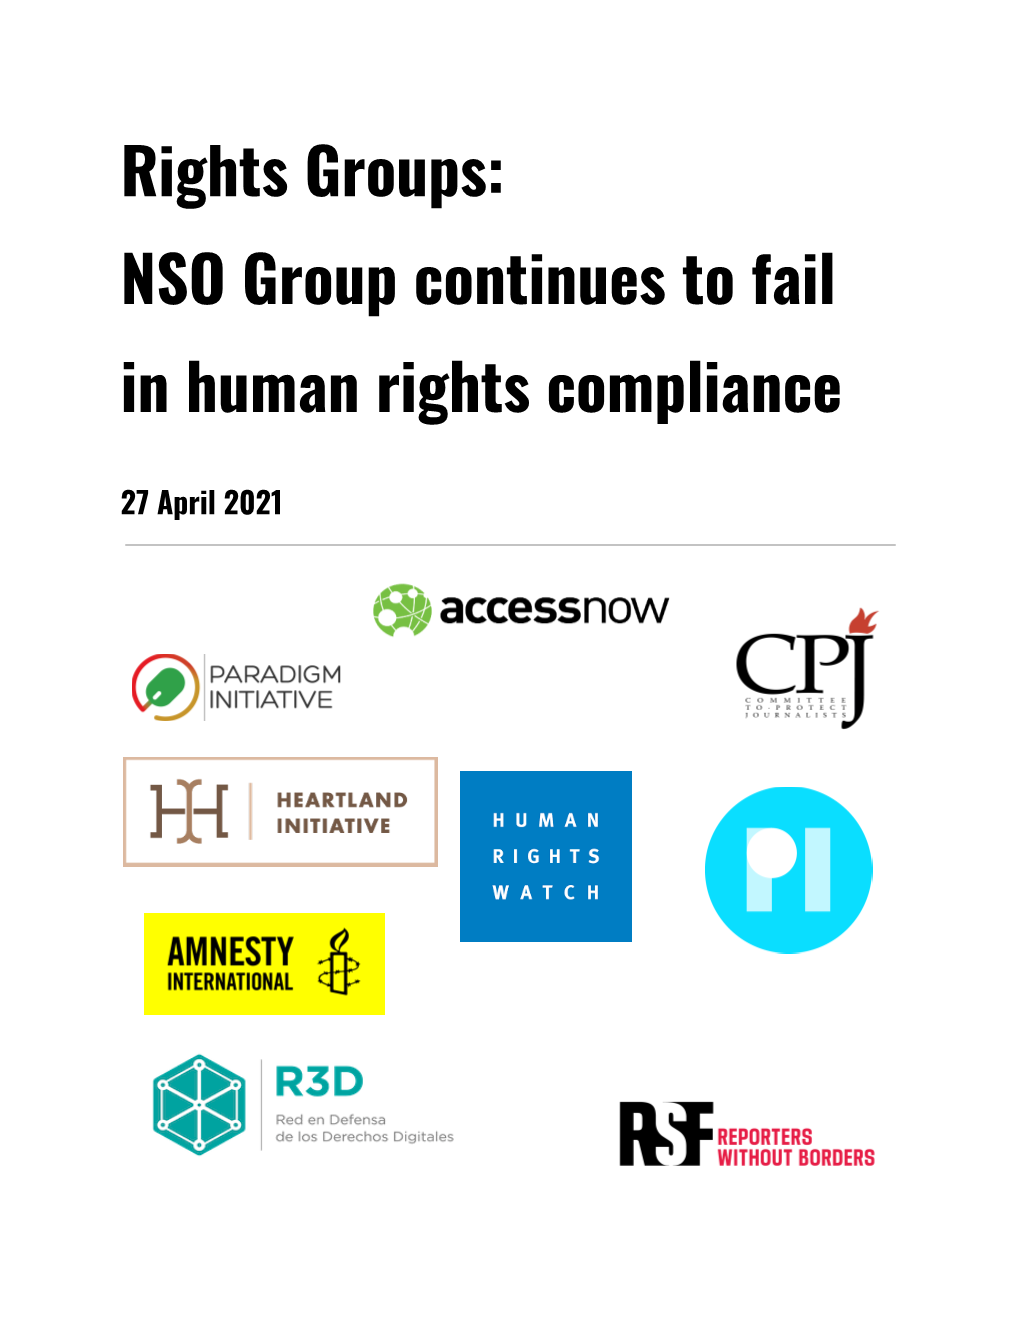 NSO Group Continues to Fail in Human Rights Compliance 27